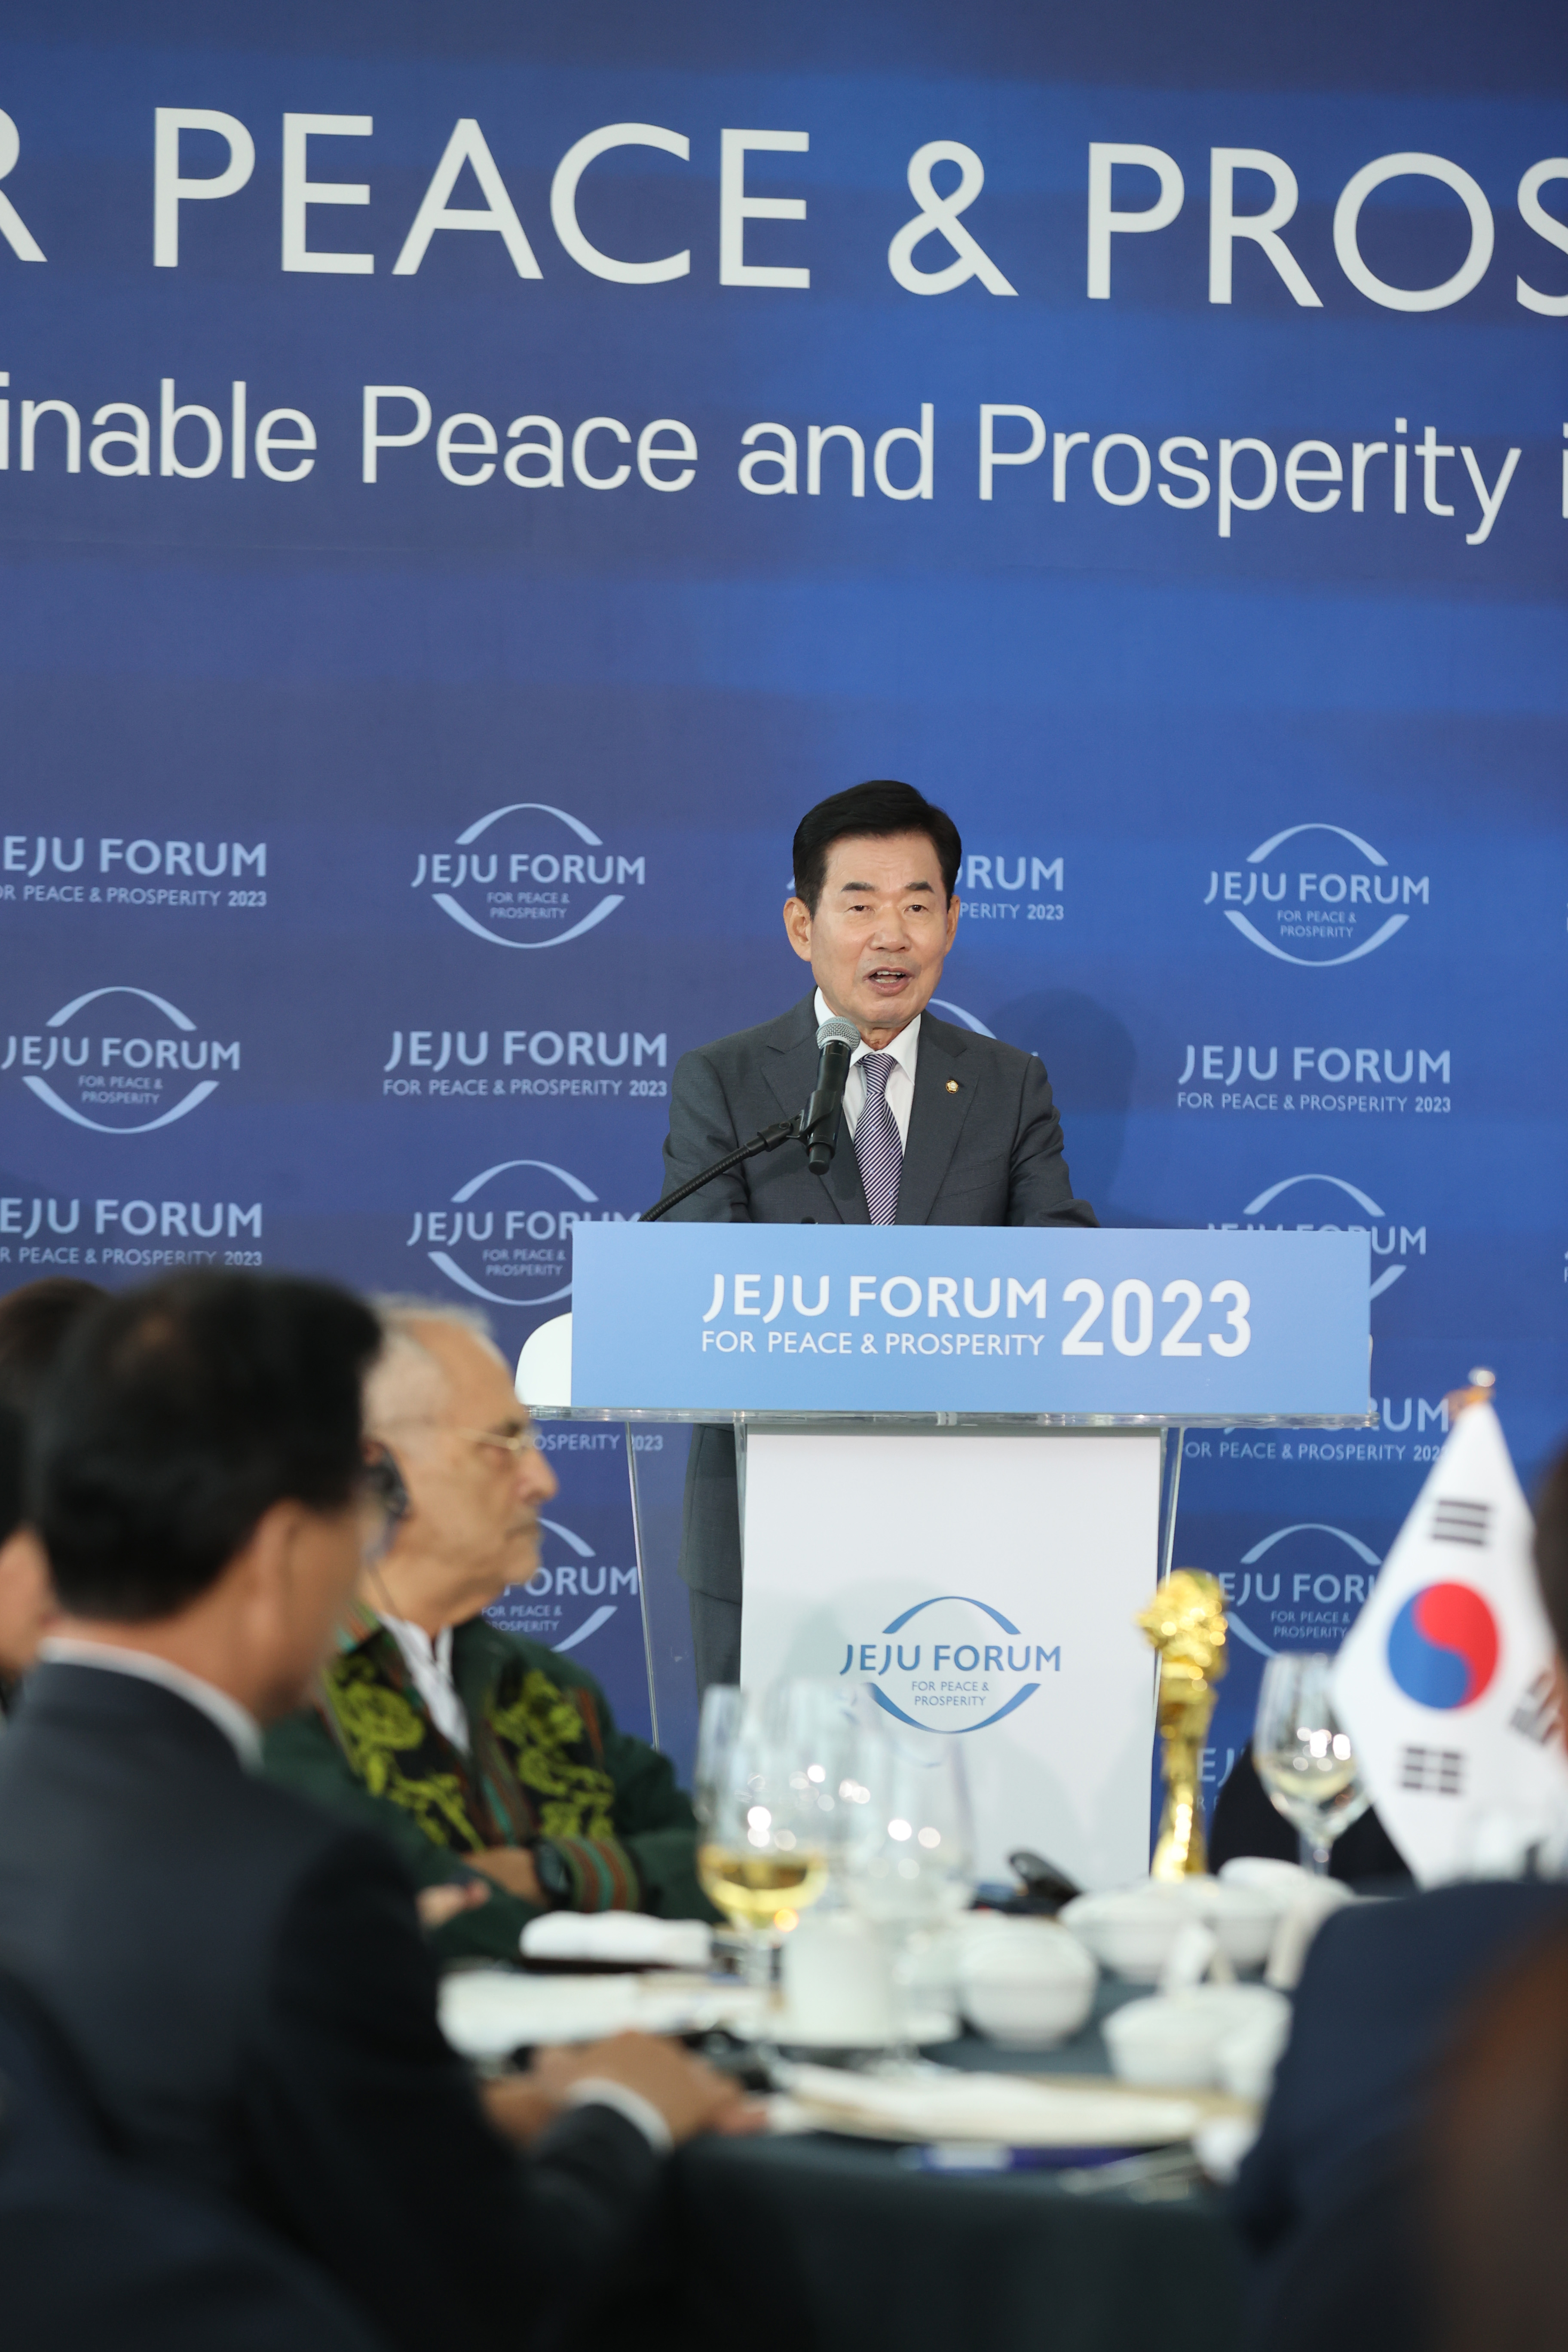 Speaker attends Jeju Forum 2023, presides over luncheon (1) 관련사진 3 보기